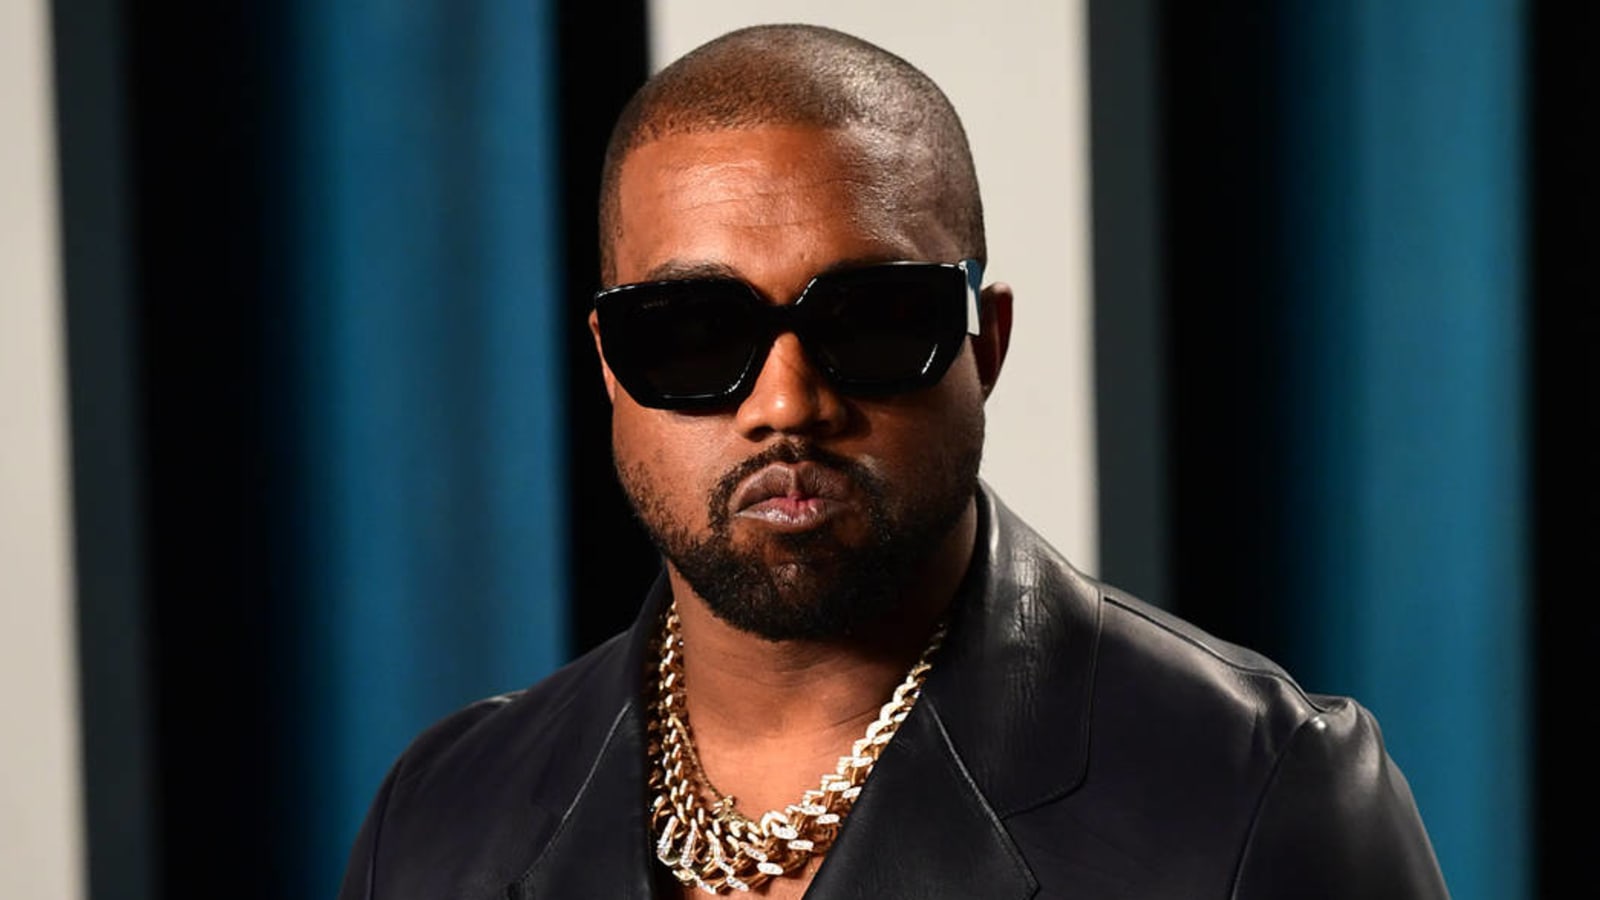 Kanye West claims long-awaited 'Donda' album was put out by Universal without his approval